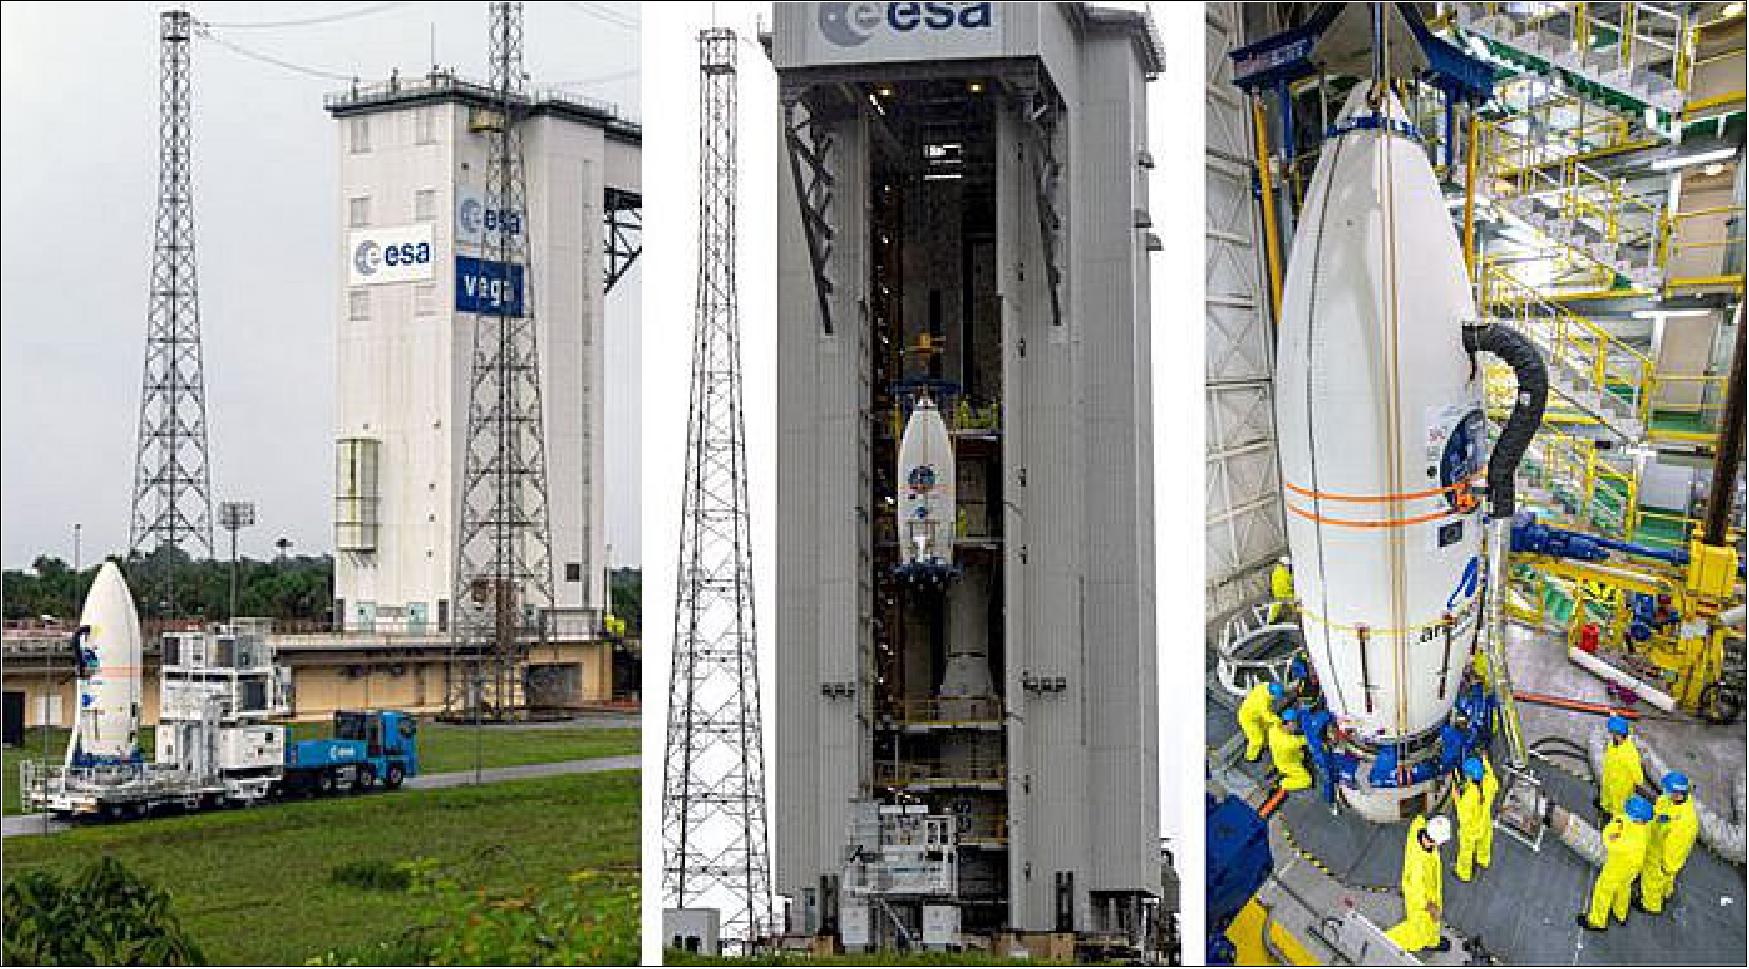 Figure 13: The payload integration process for Flight VV16 is shown at the Spaceport, beginning with Vega's upper composite being transferred to the SLV Launch Complex (photo at left). It was then hoisted up the launch site's mobile gantry for installation atop the launcher (photos center, and right), image credit: Arianespace